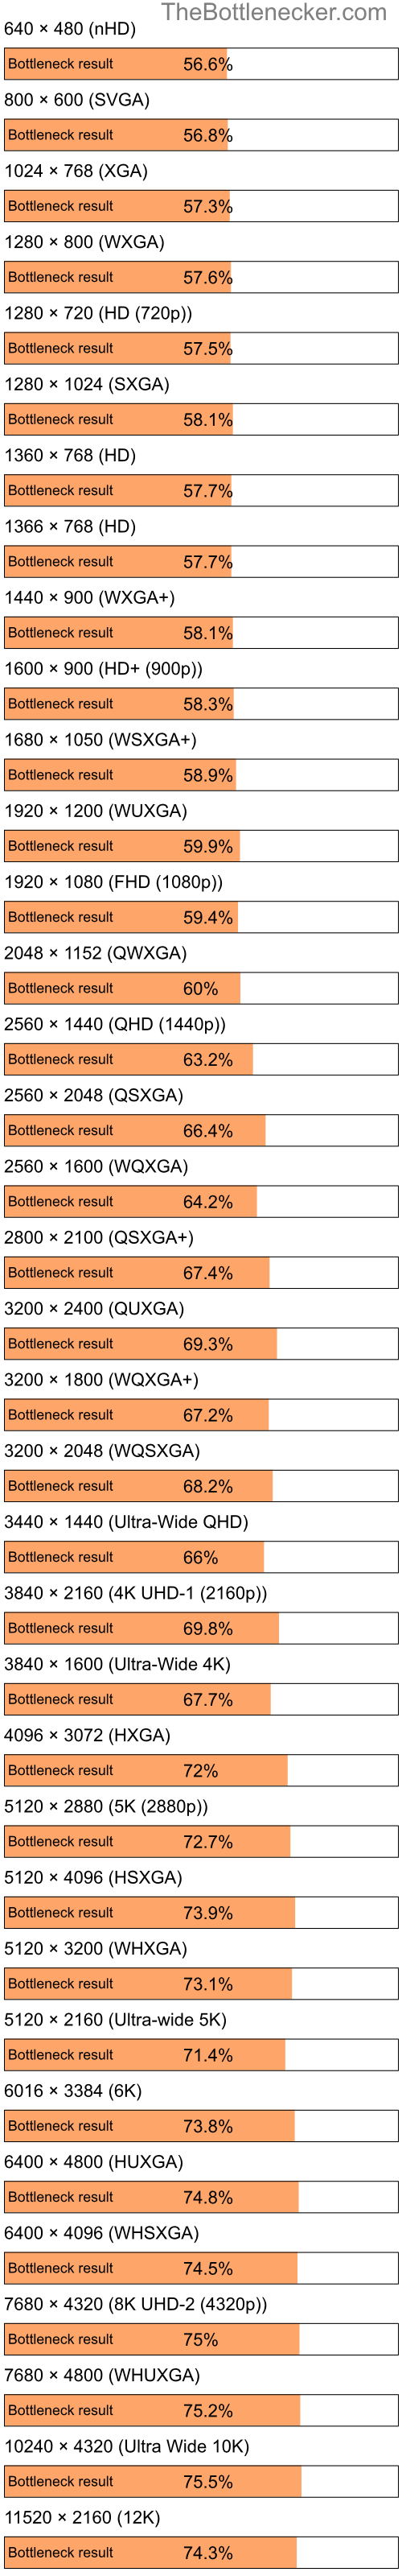 Bottleneck results by resolution for Intel Pentium 4 and NVIDIA GeForce 8600M GT in Processor Intense Tasks